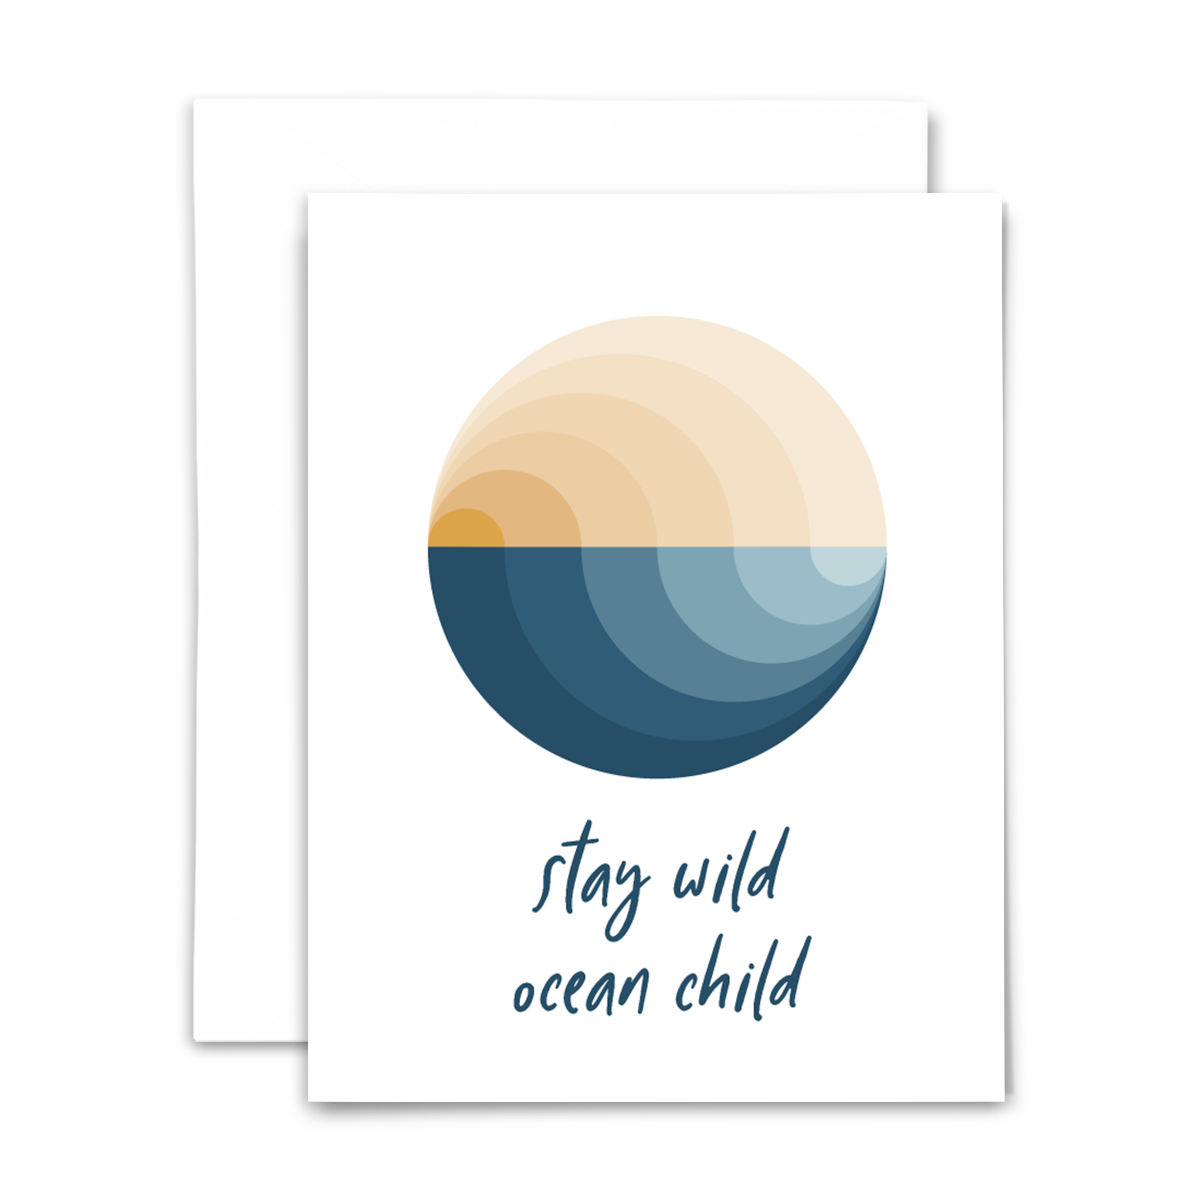 Blank greeting card with blue font: "stay wild ocean child" with circle; half sunset, half ocean waves in shades of golds and blues